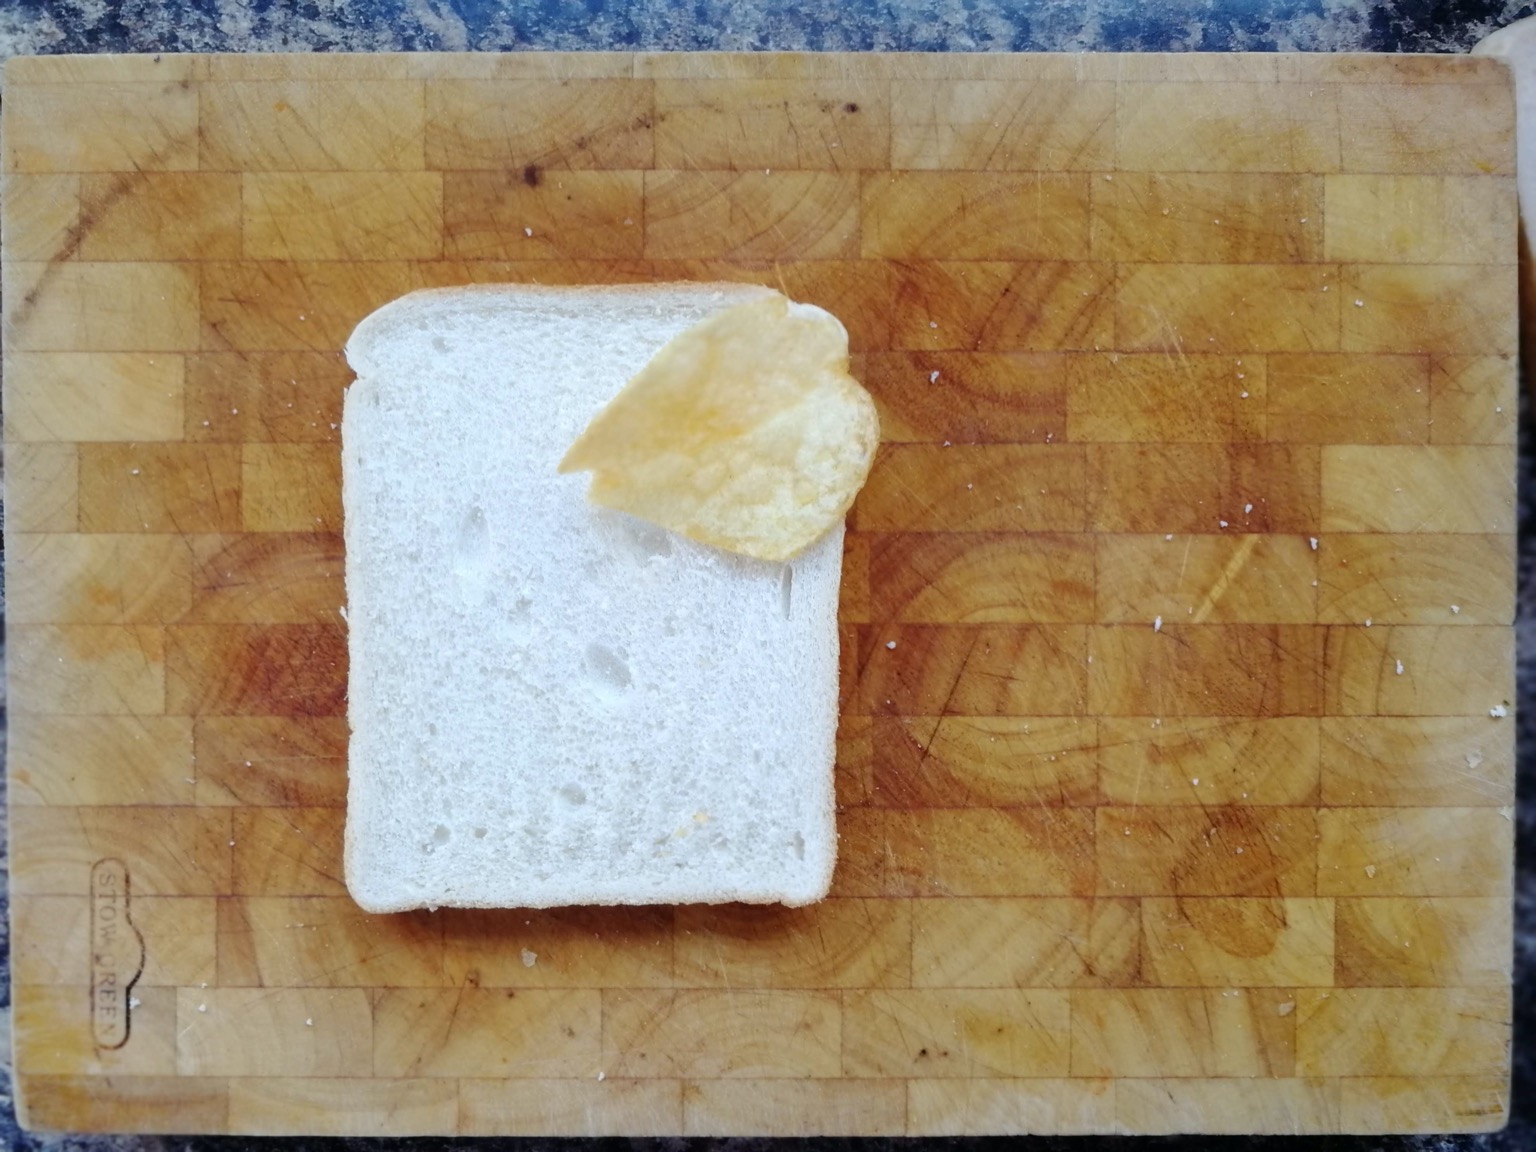 One crisp on white bread on a chopping board